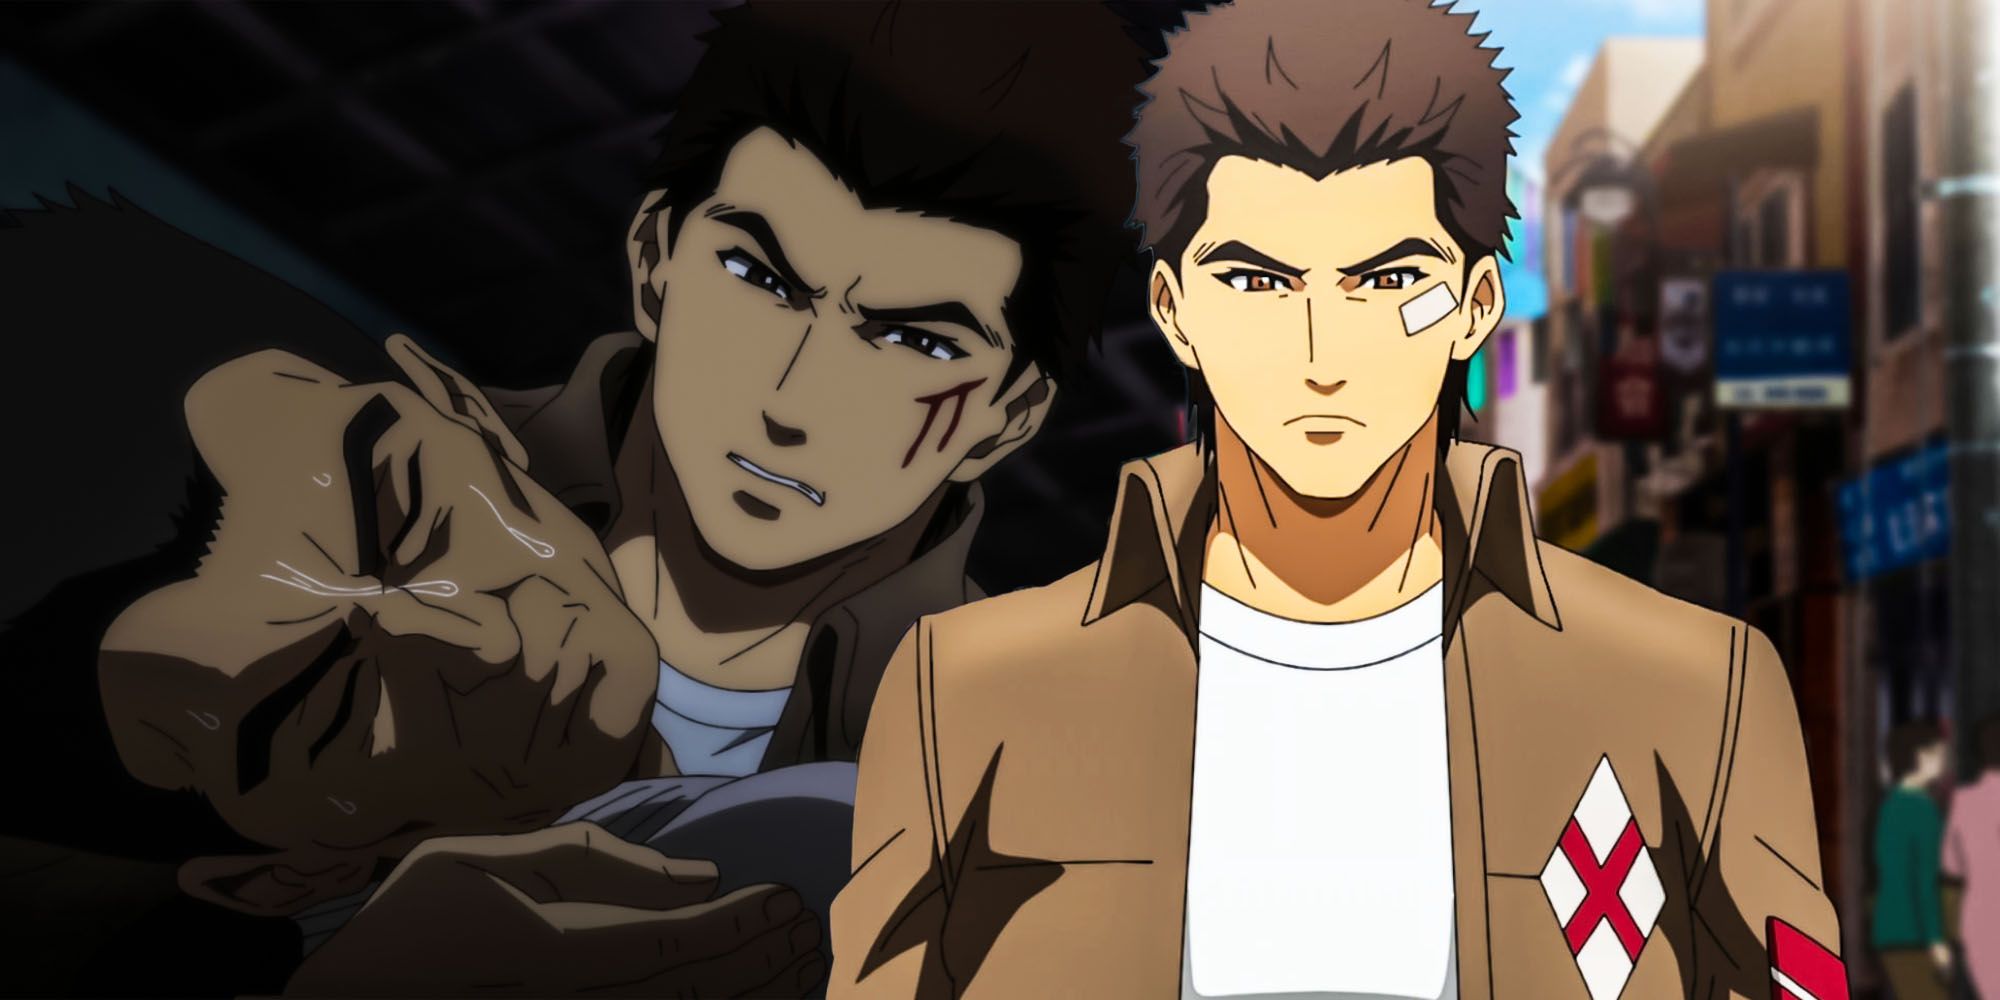 Shenmue anime reveals and changes origin of Ryos face injury